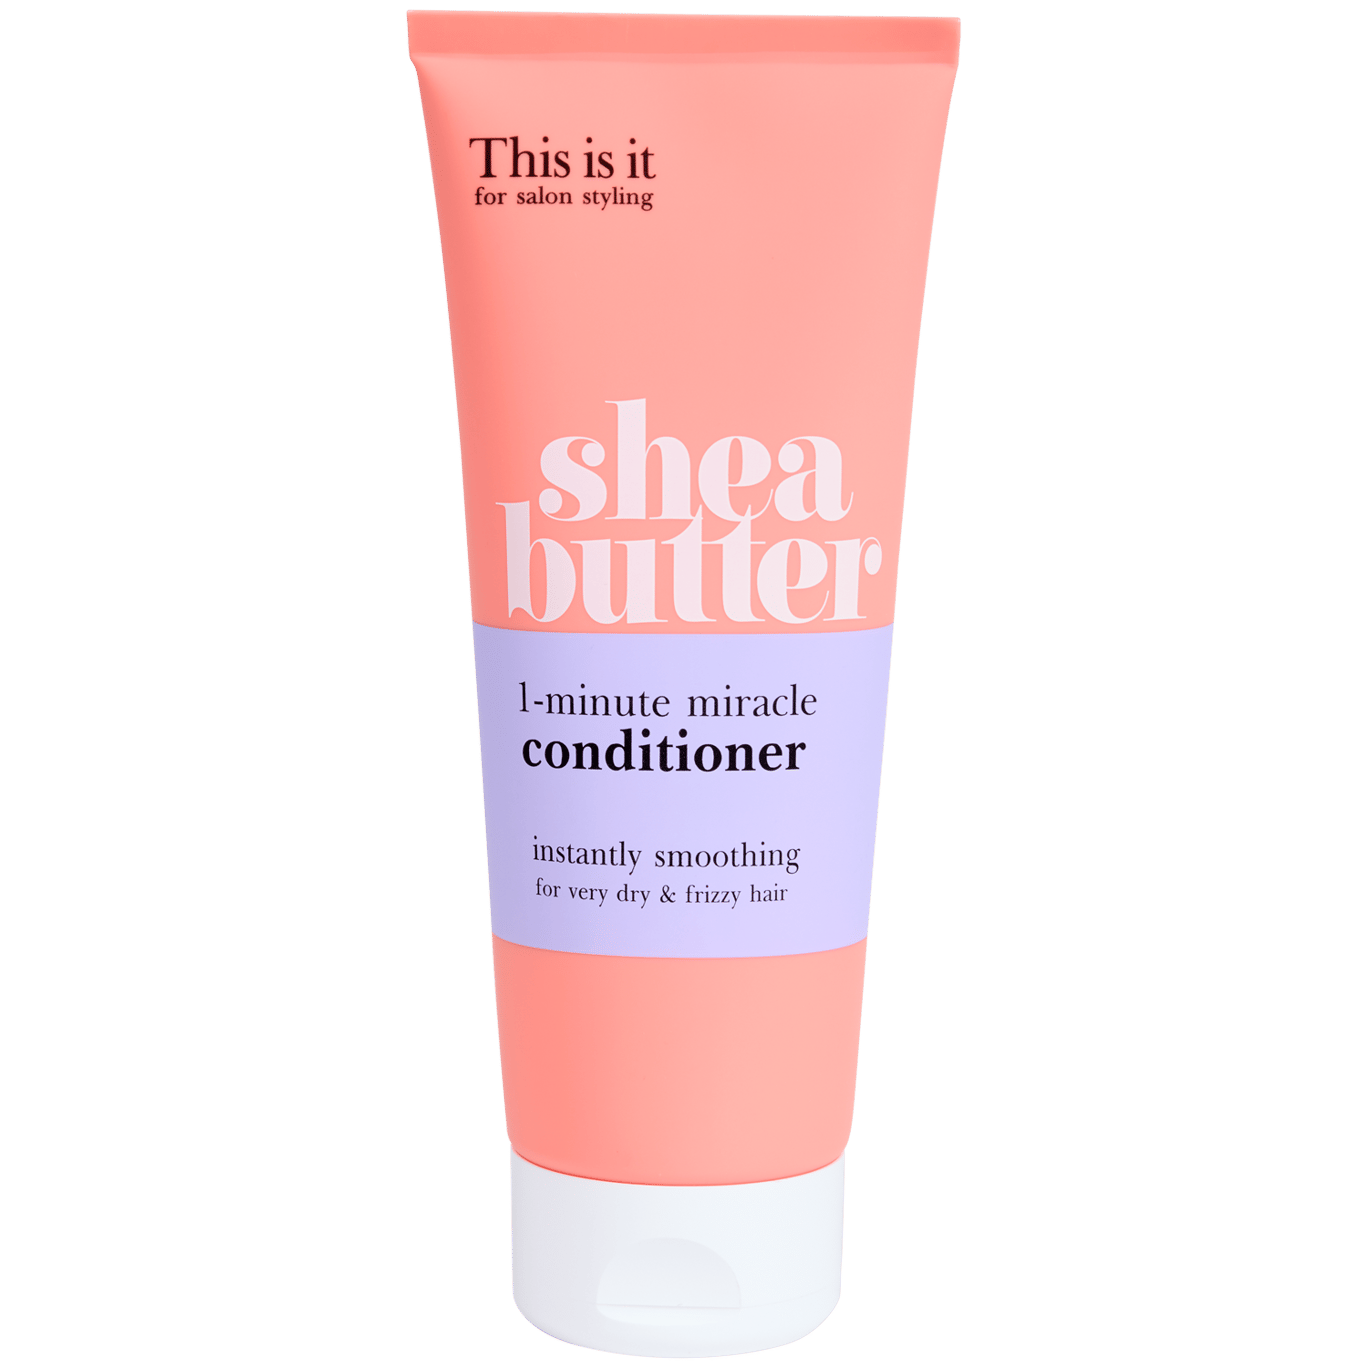 This is it 1-minute miracle conditioner Shea Butter